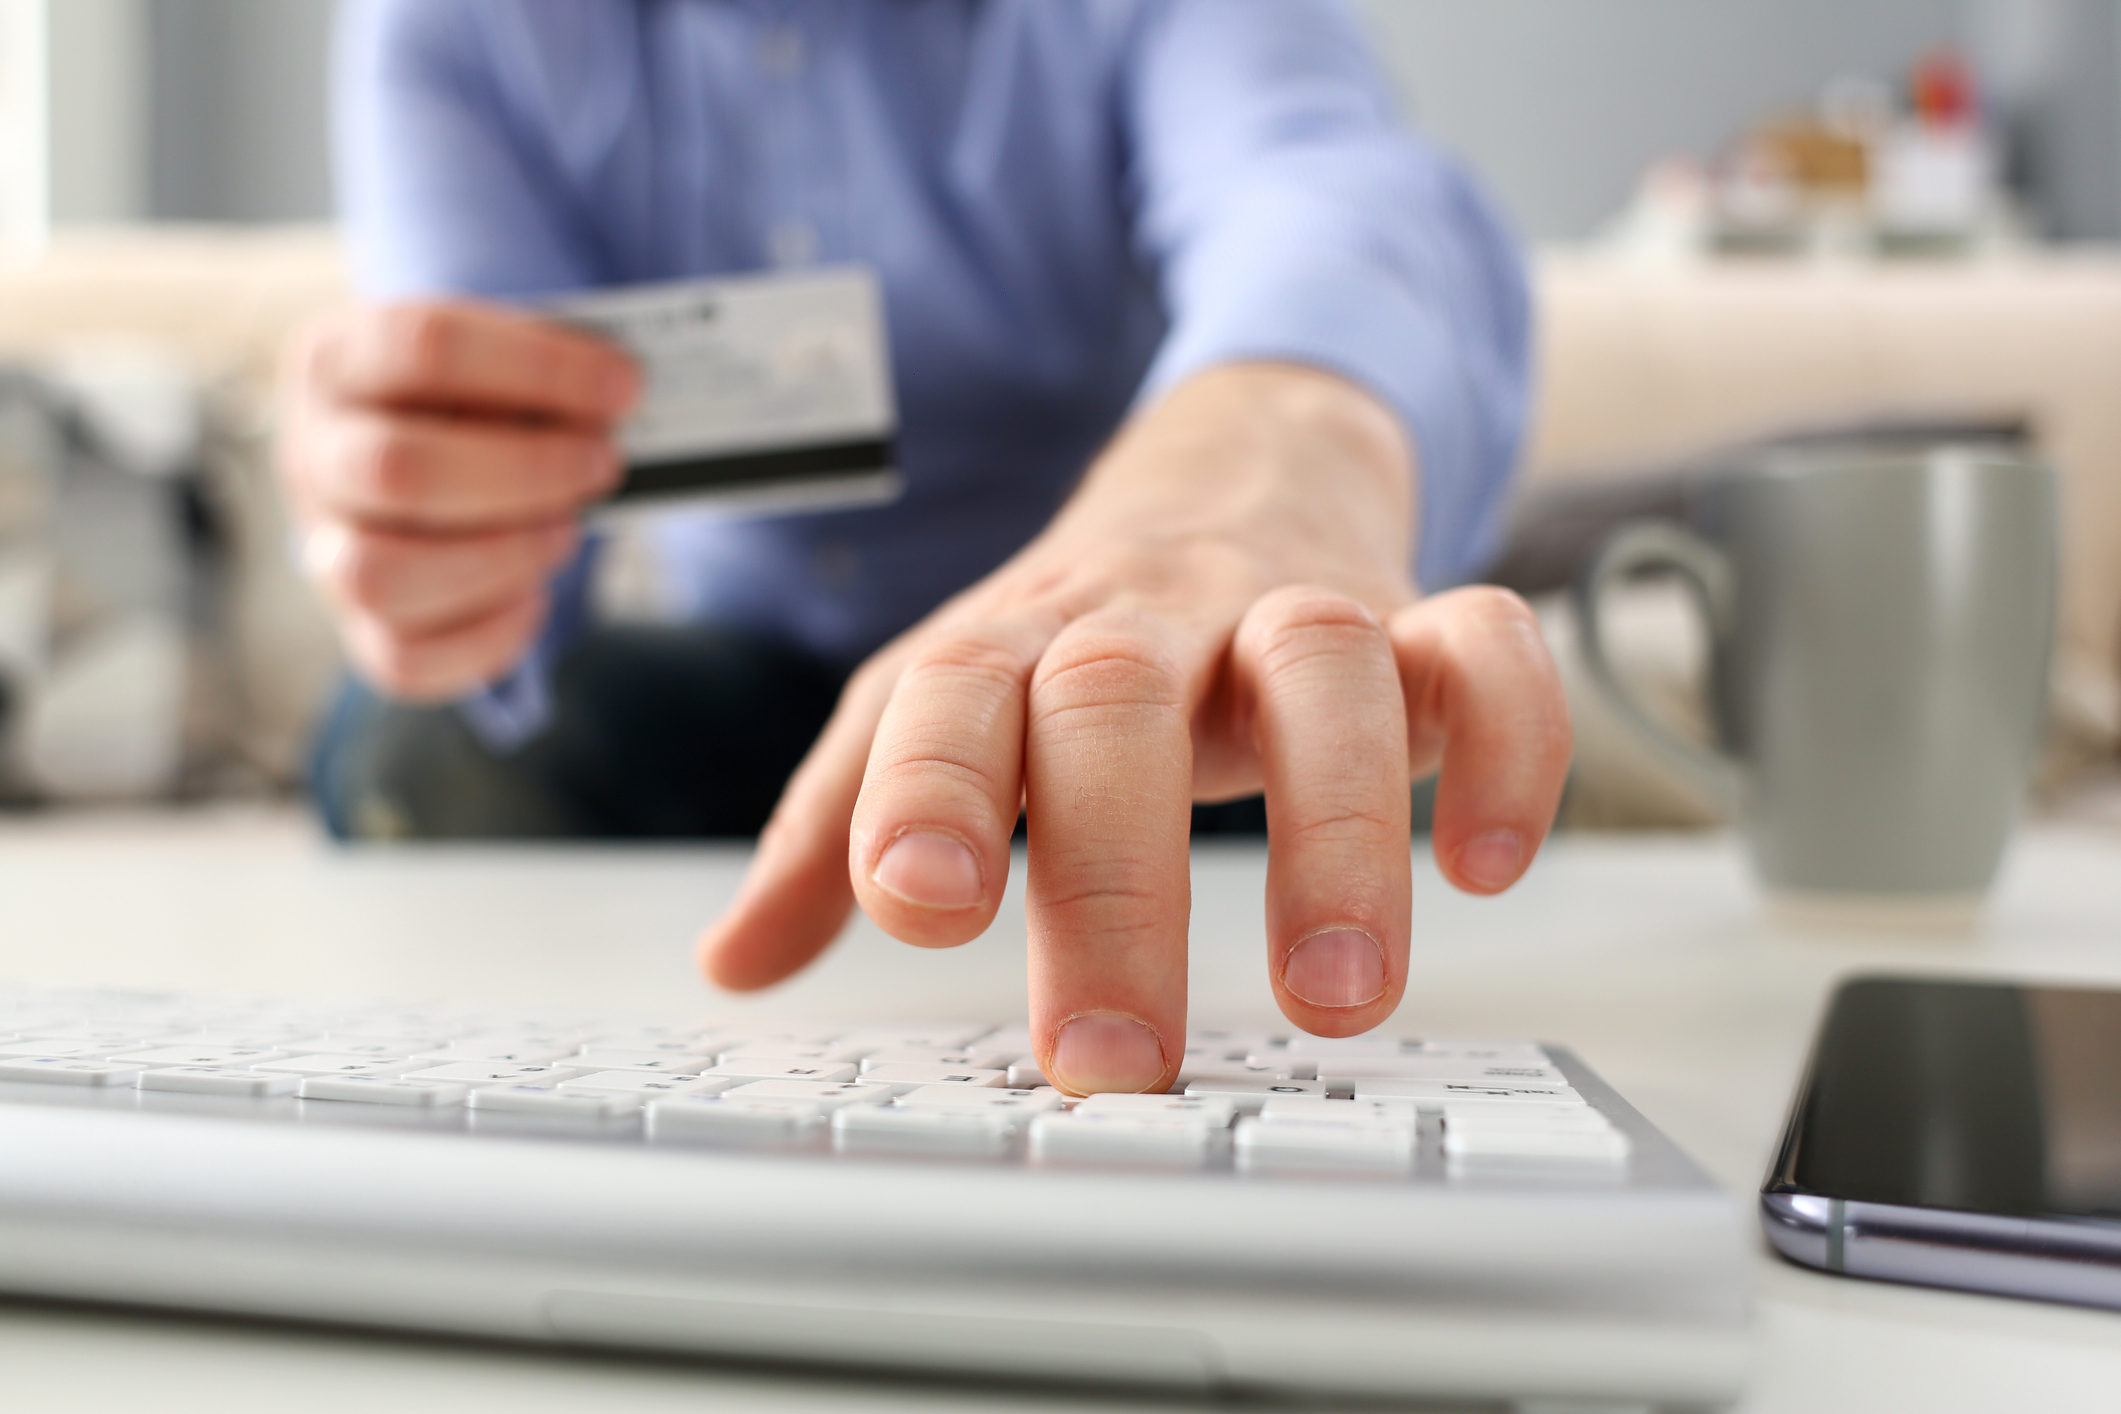 photo of a man typing on a keyboard and holding a bank card, problem gambling and gambling addiction